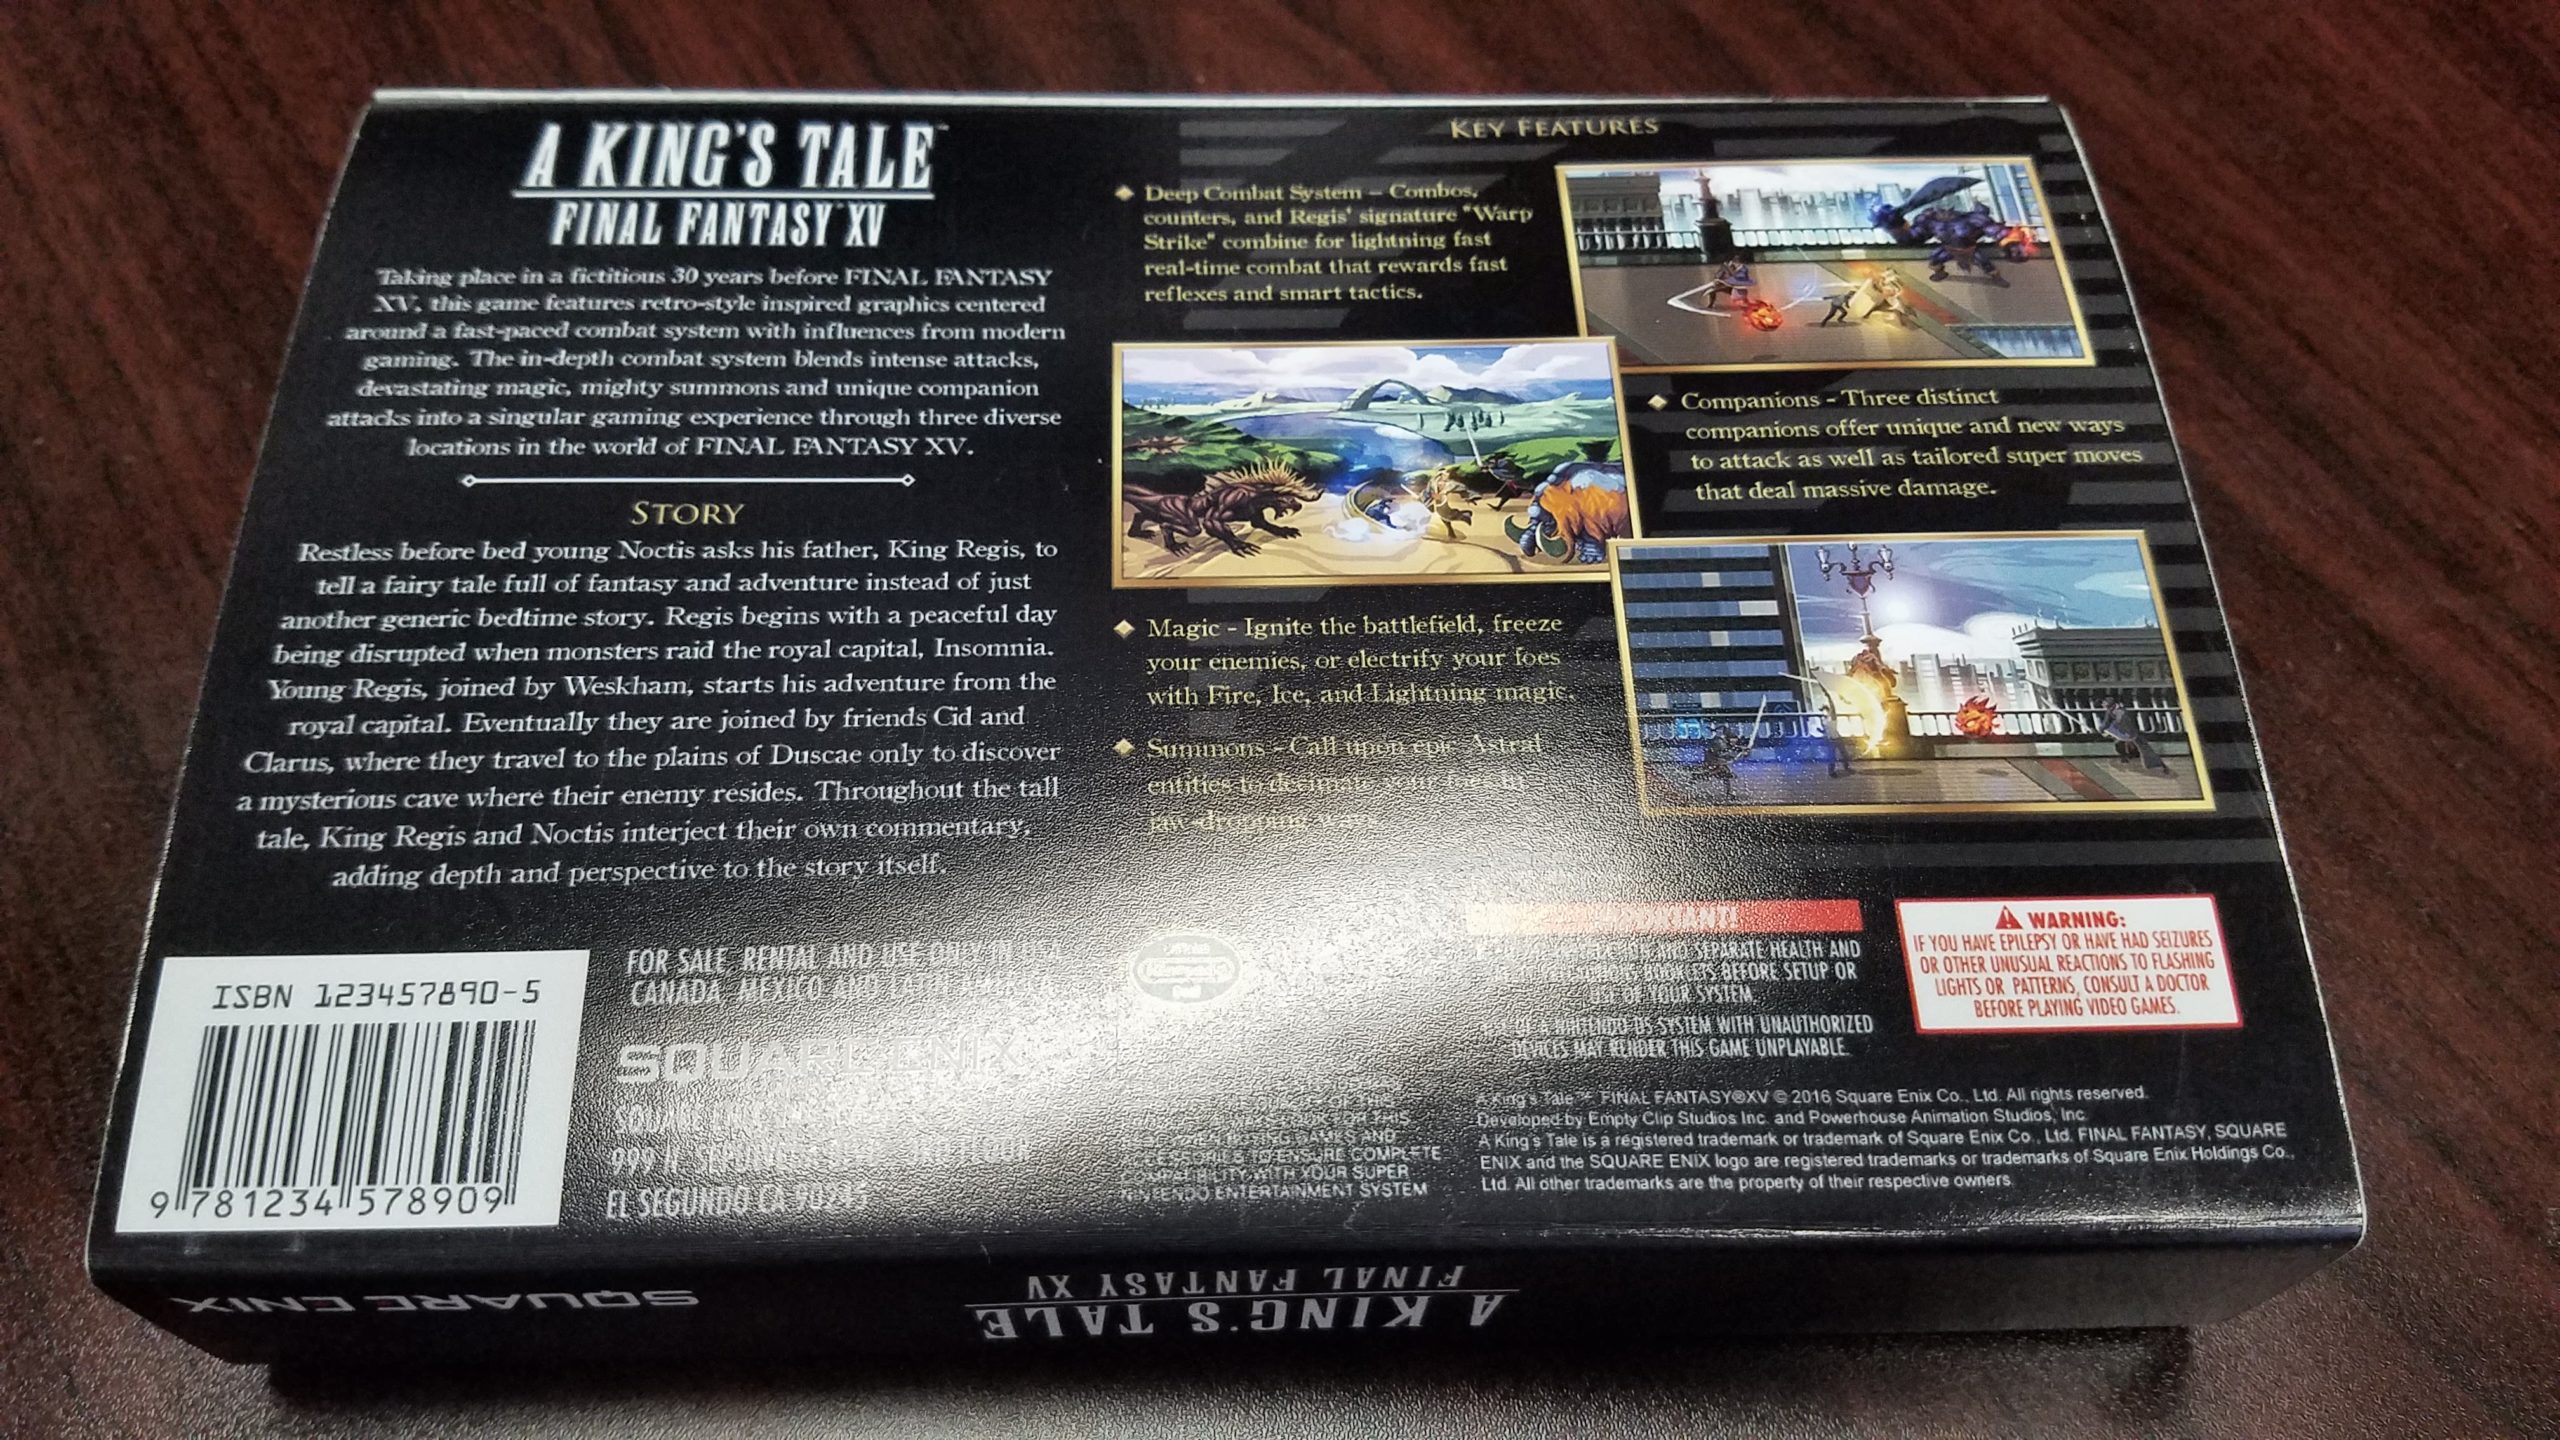 Square Enix Gave Sweet, Fake SNES Carts To King’s Tale Staff